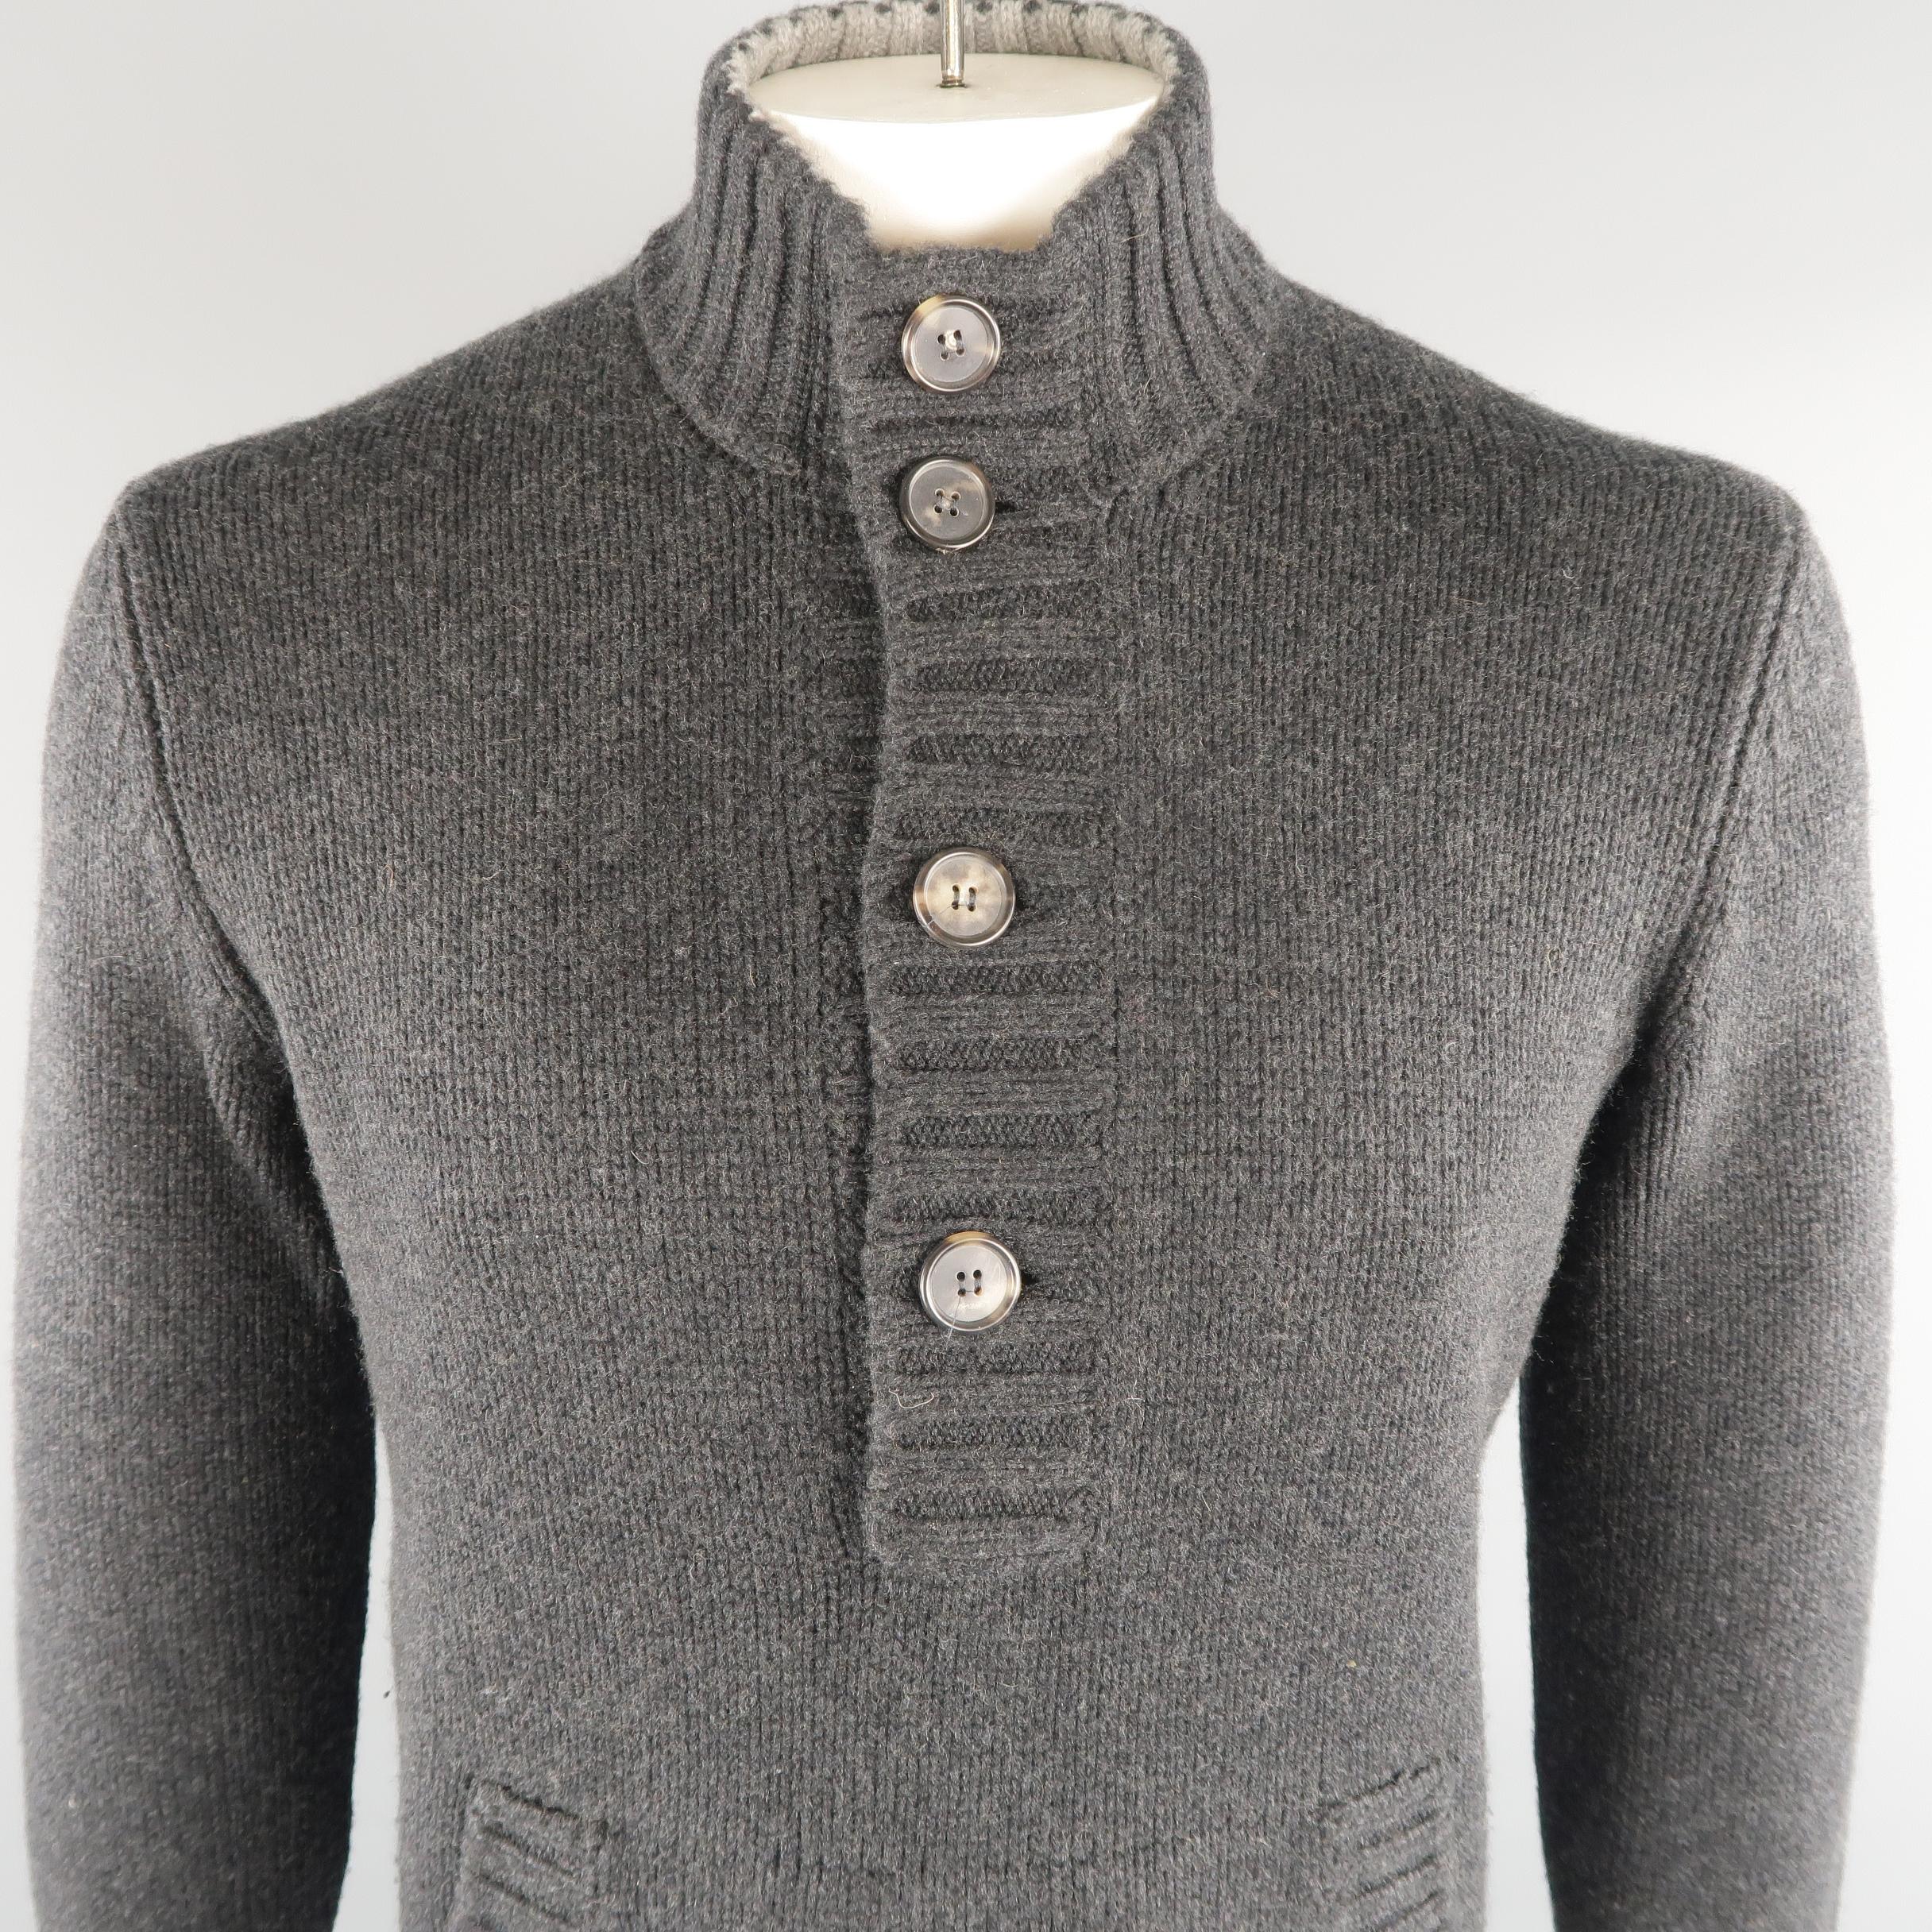 BRUNELLO CUCINELLI  henley sweater comes in 100% cashmere in a charcoal tone, knitted, with front pockets, ribbed cuffs and waistband. Made in Italy.
 
Excellent Pre-Owned Condition.
Marked: 52 IT
 
Measurements:
 
Shoulder: 17.5 in.
Chest: 45